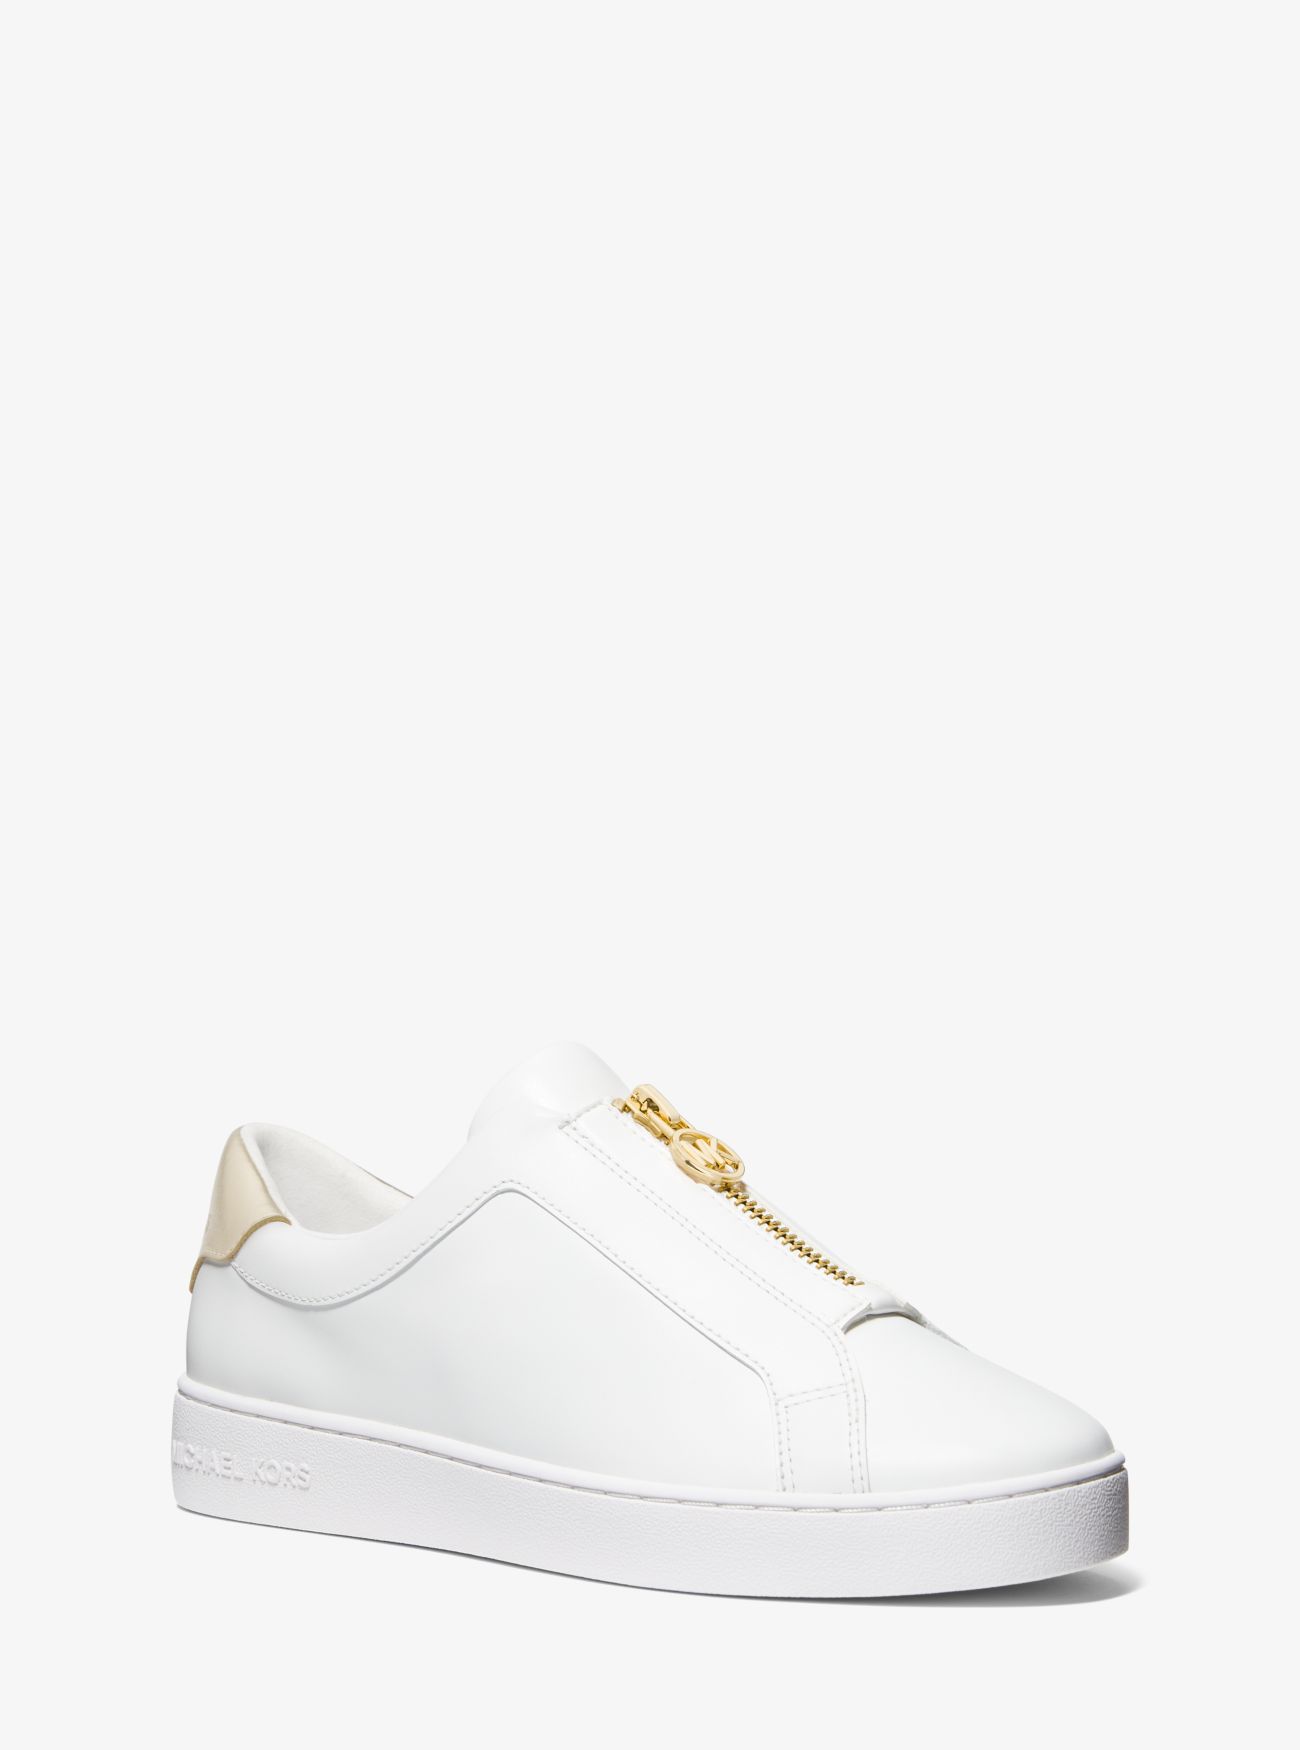 MK Keaton Leather Zip-Up Trainers - Pale Gold - Michael Kors